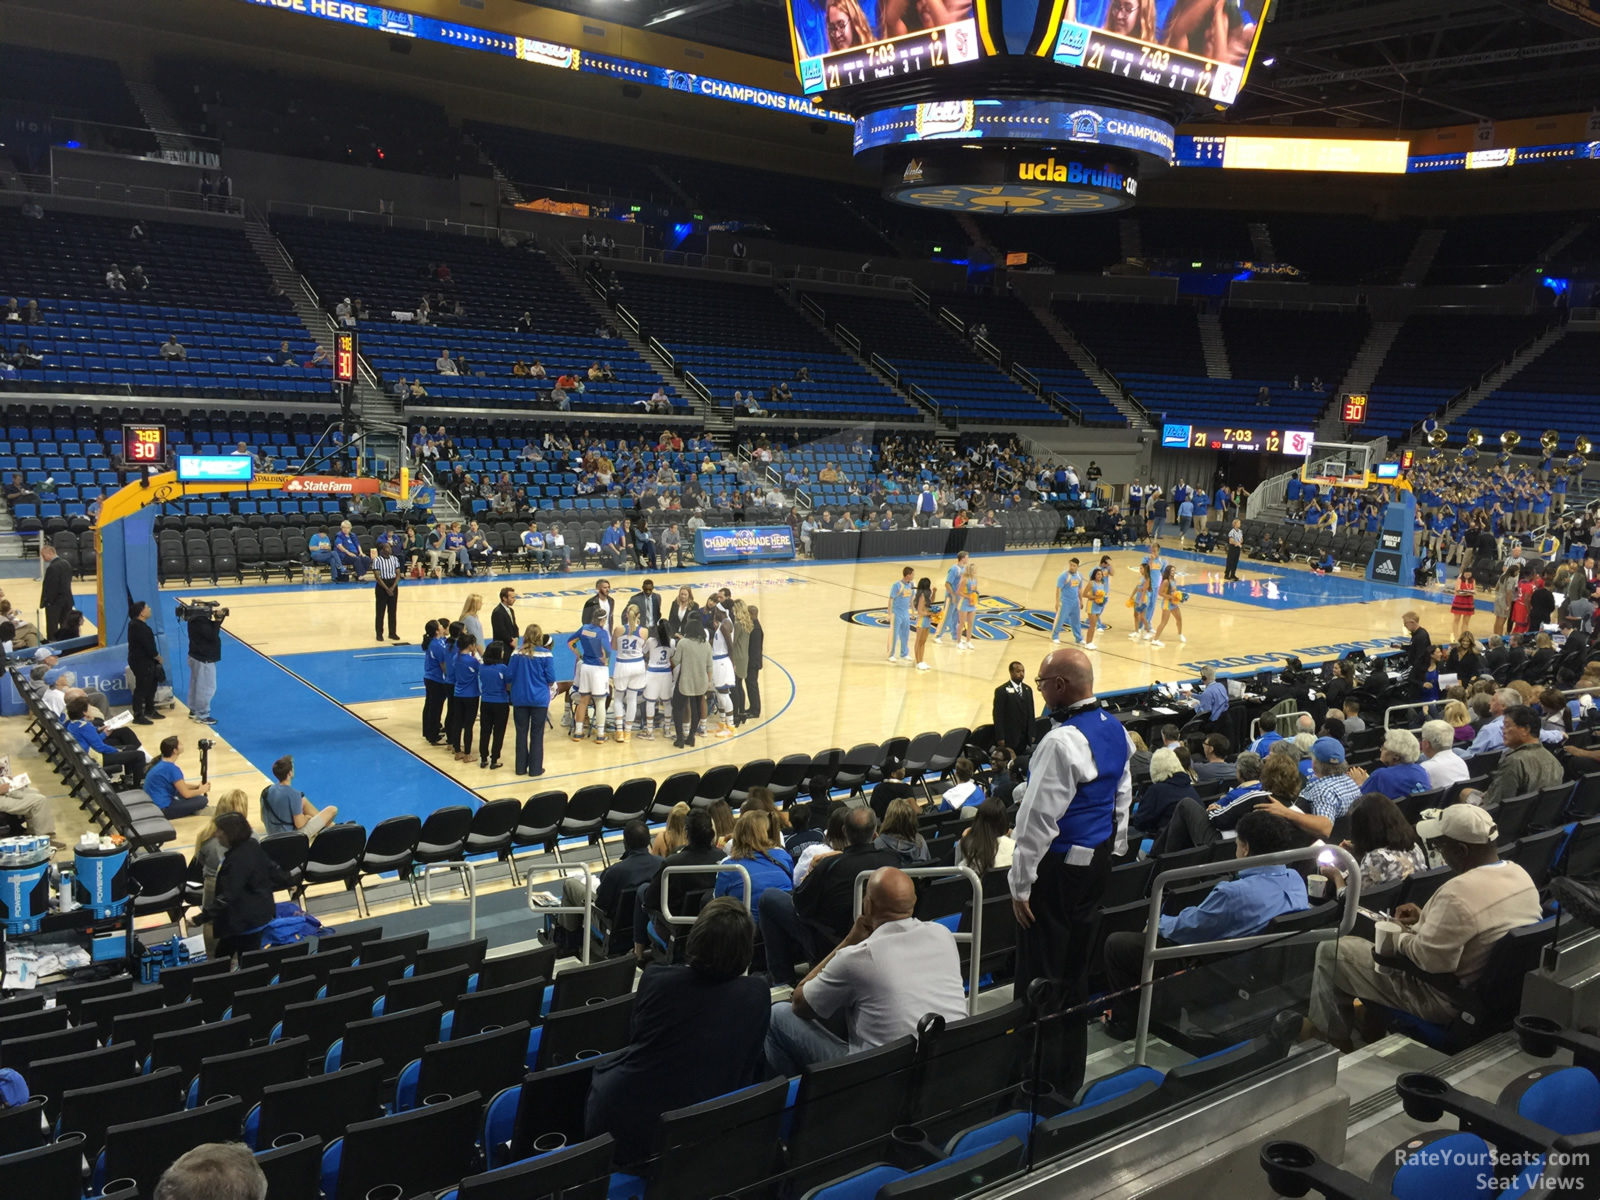 section 104, row 3 seat view  - pauley pavilion